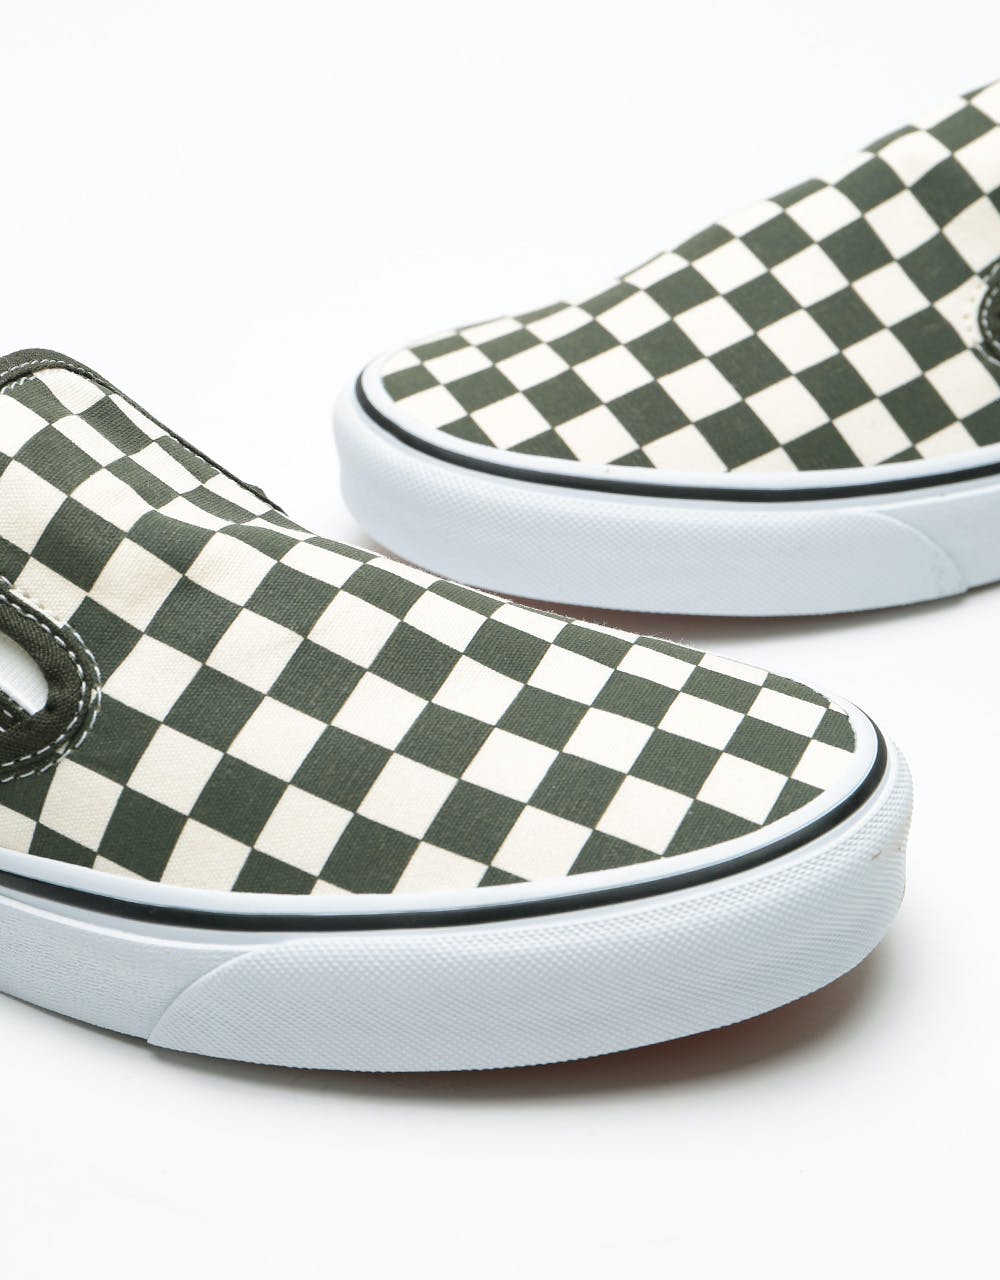 Vans Classic Slip-On Skate Shoes - (Checkerboard) Forest Night/True White